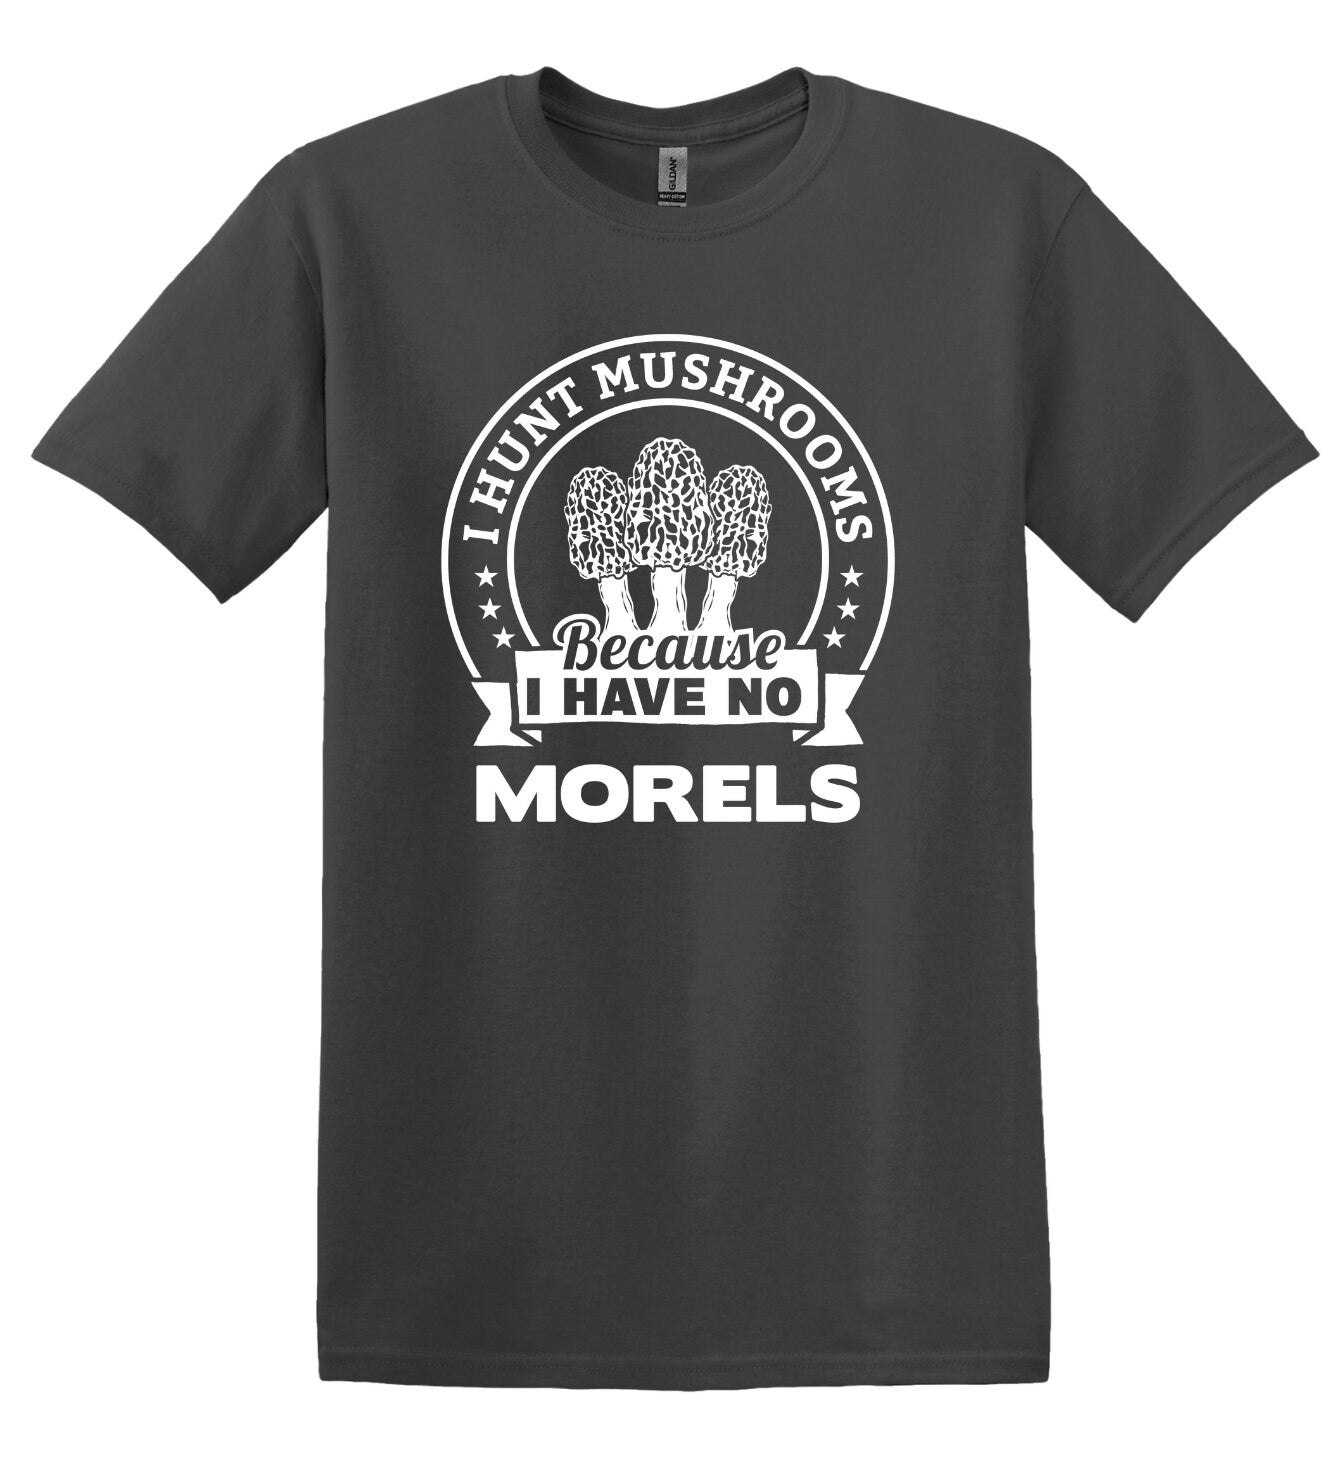 I Hunt Mushrooms Because I have No Morels; Long & Short Sleeve Cotton Shirt, Women and Unisex Style, Adult Tee